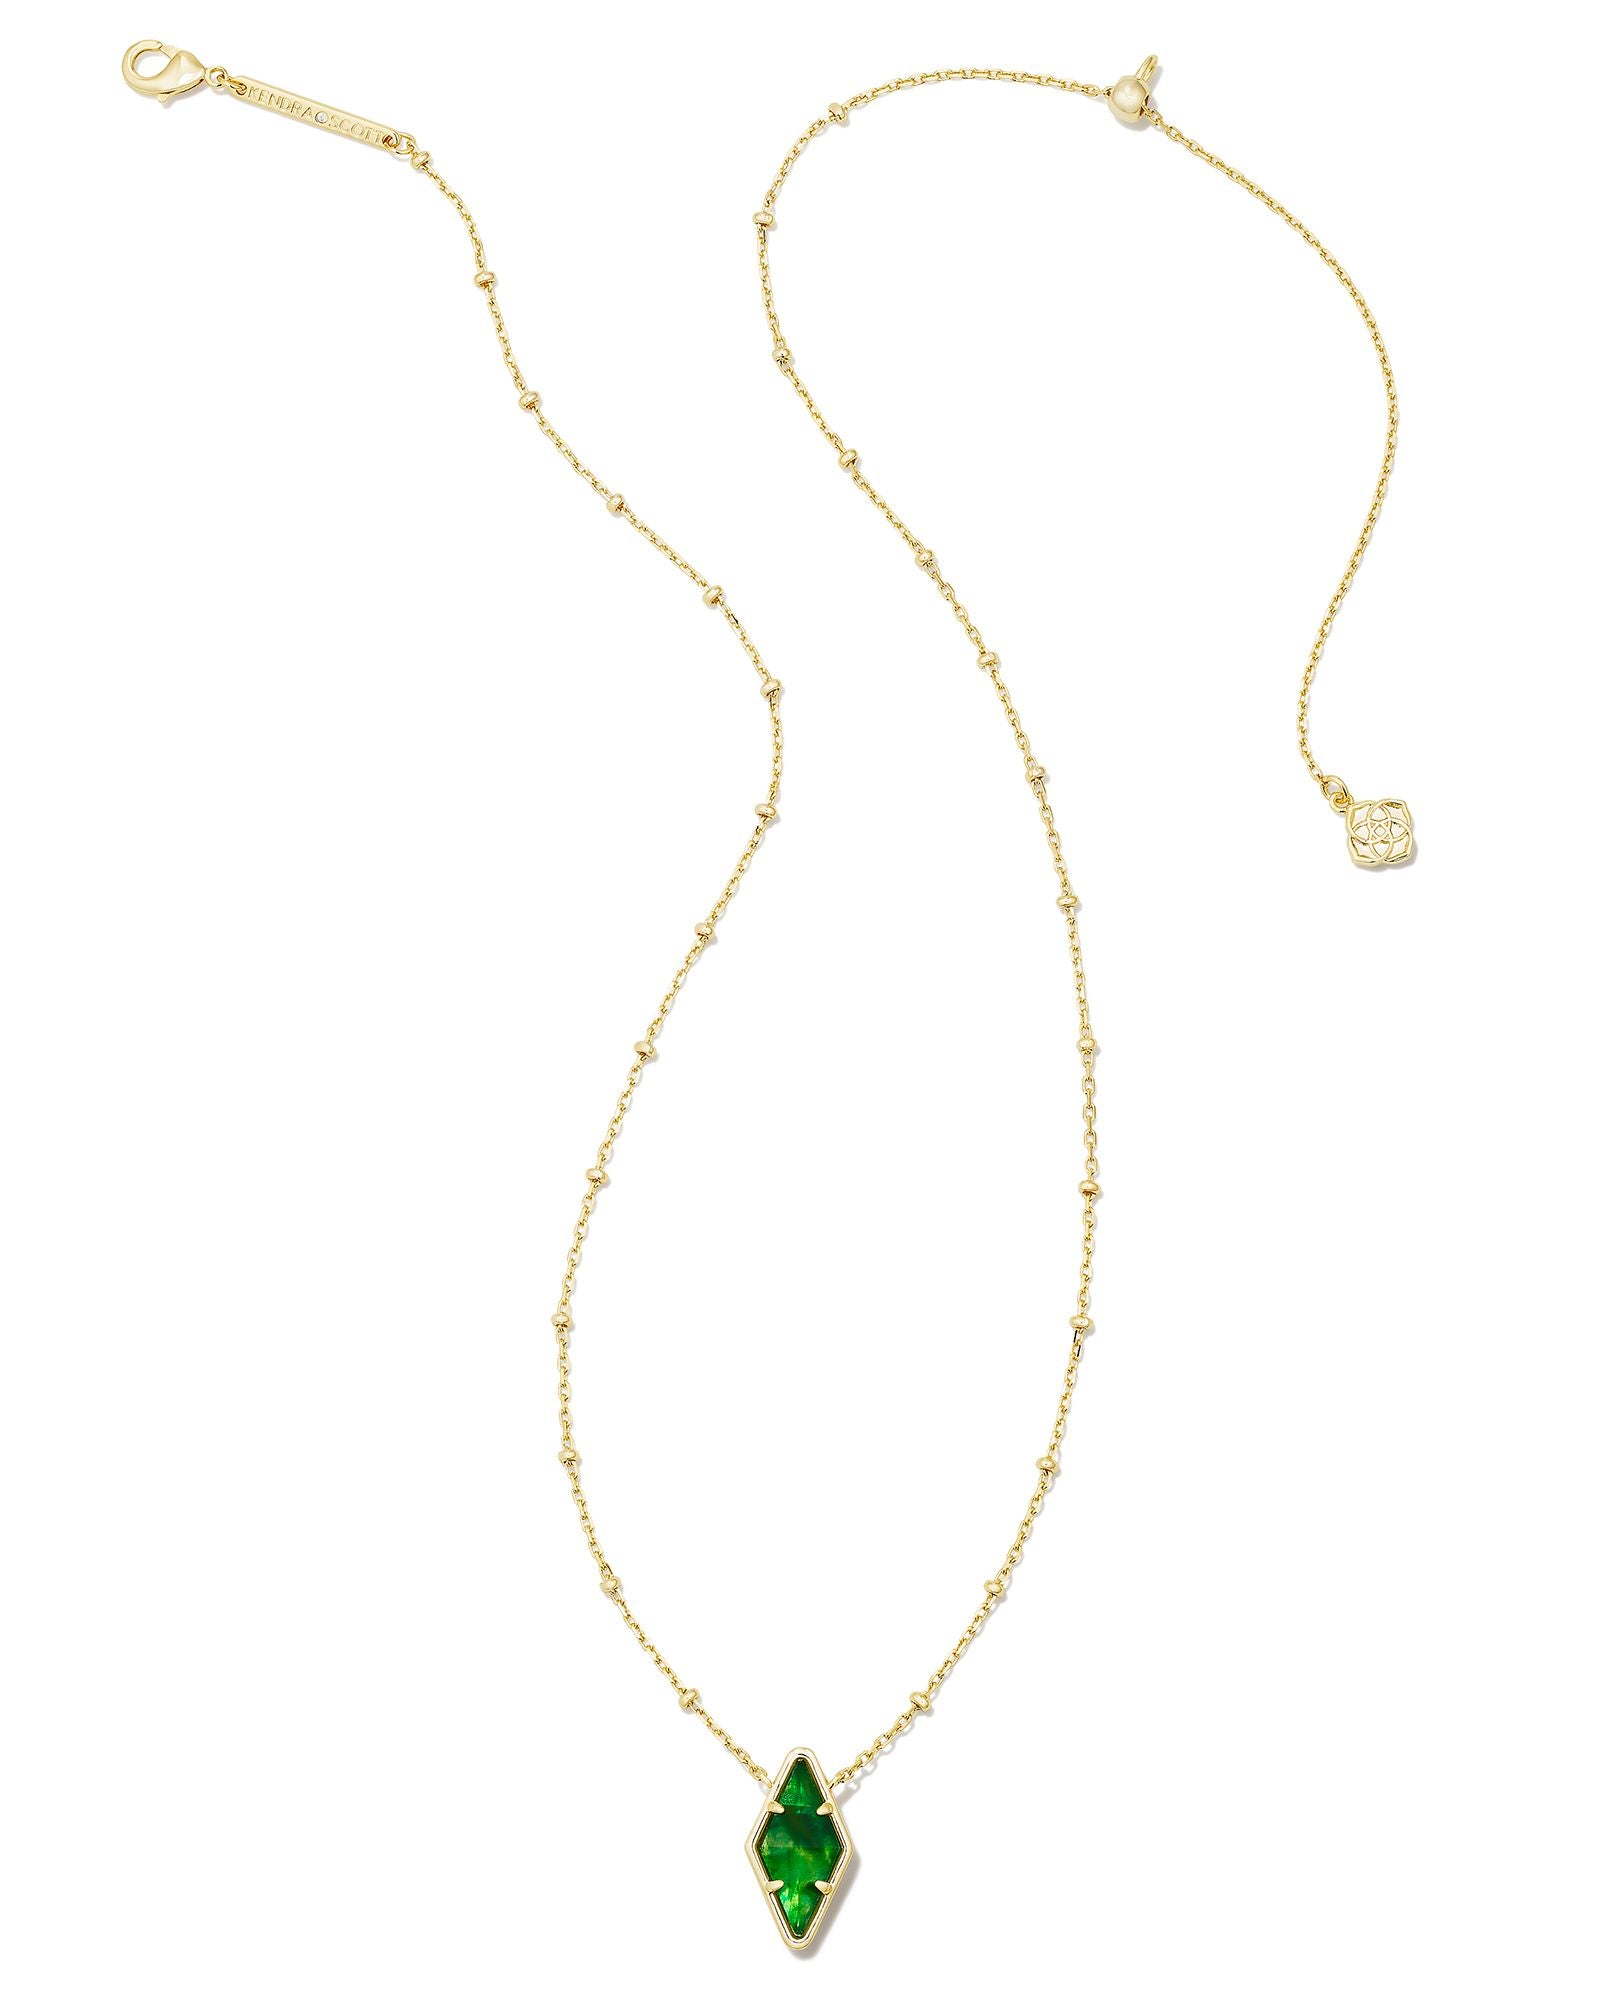 Kendra Scott | Kinsley Gold Short Pendant Necklace in Kelly Green Illusion - Giddy Up Glamour Boutique